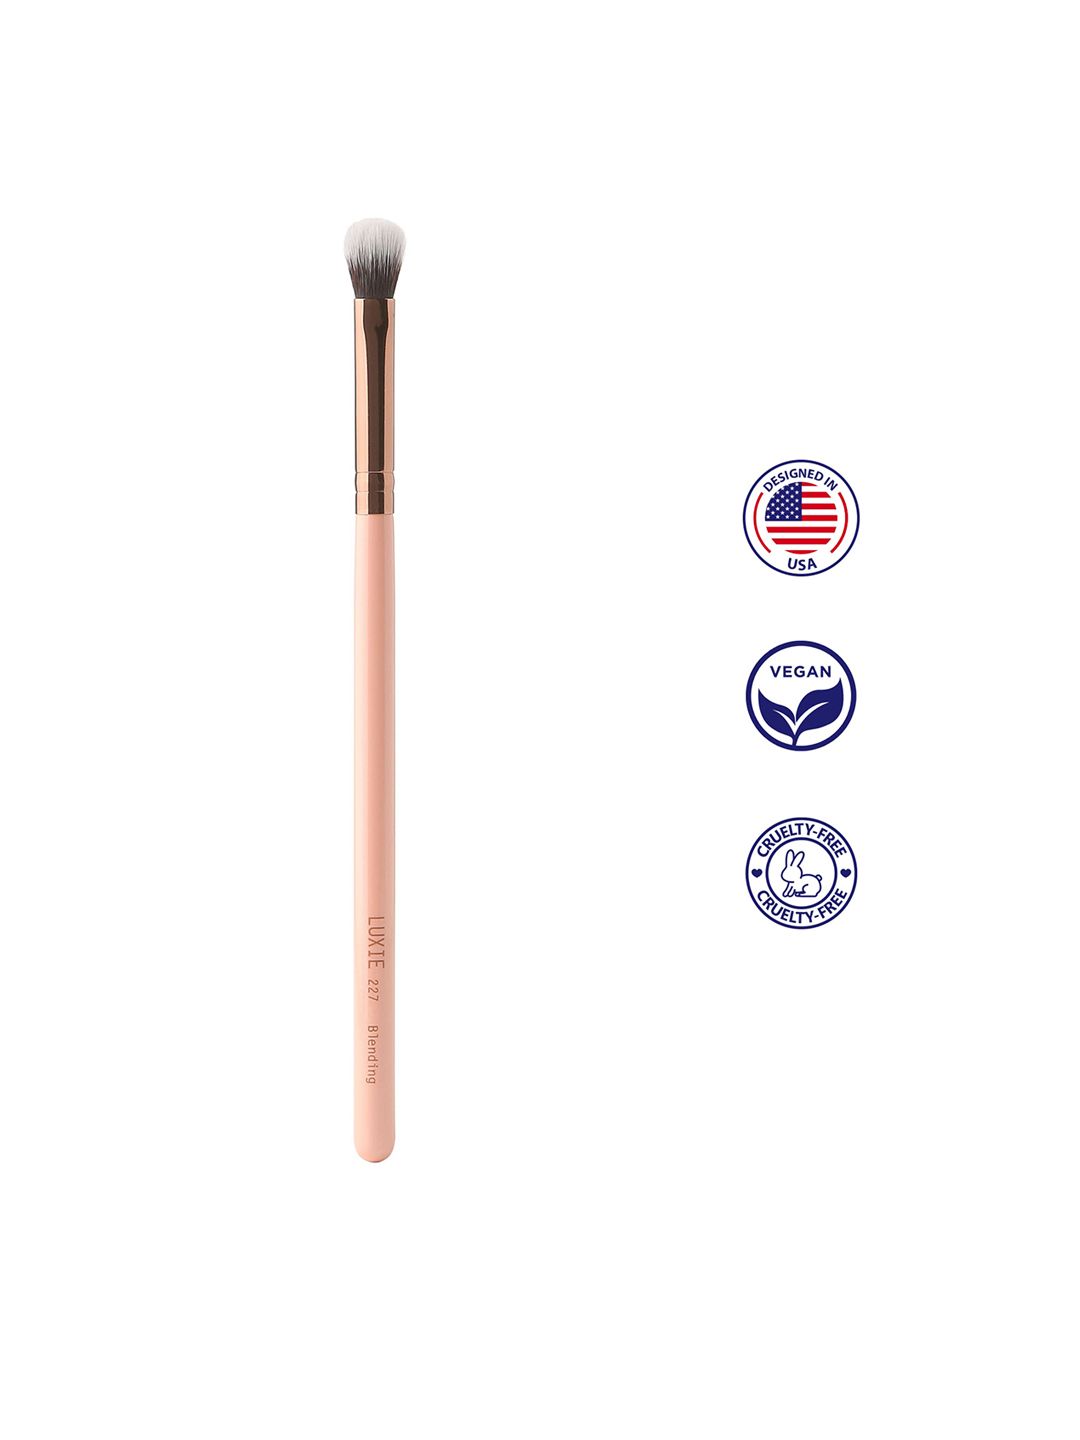 LUXIE Rose Gold Blending Brush - 227 Price in India